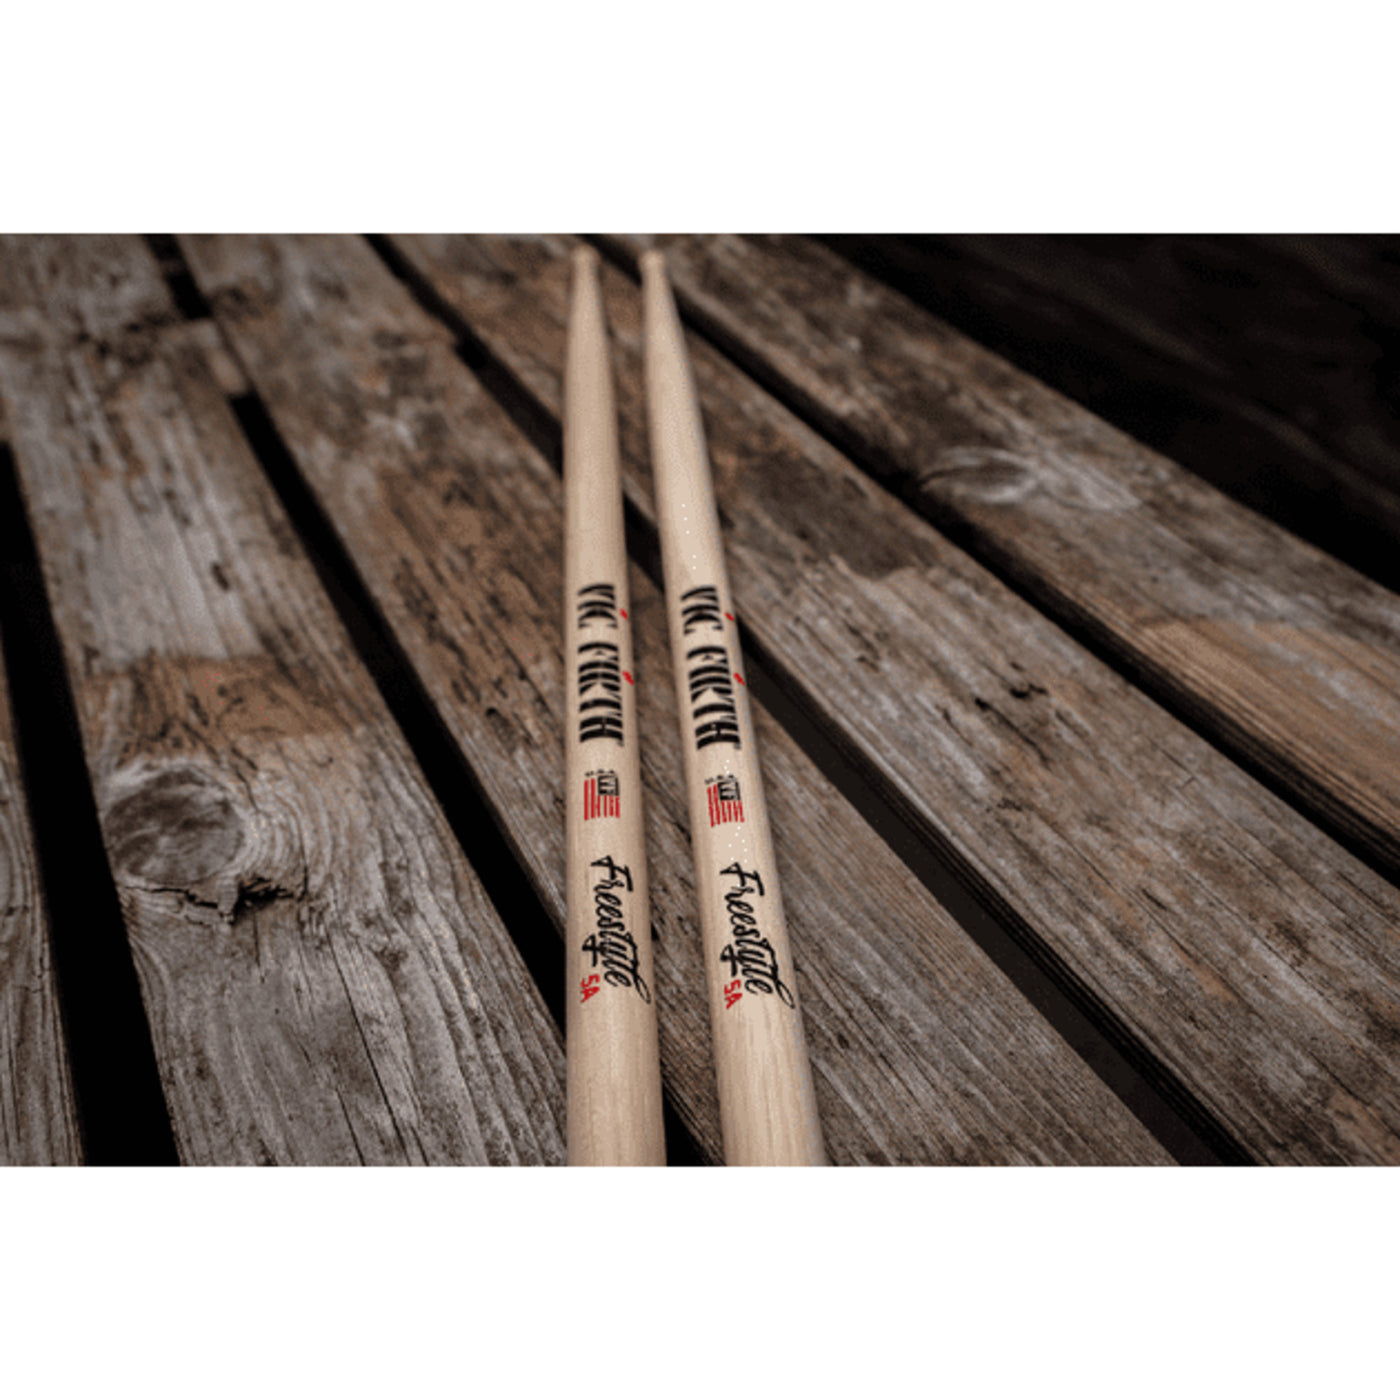 Vic Firth American Concept, Freestyle 5A Drumstick (FS5A)